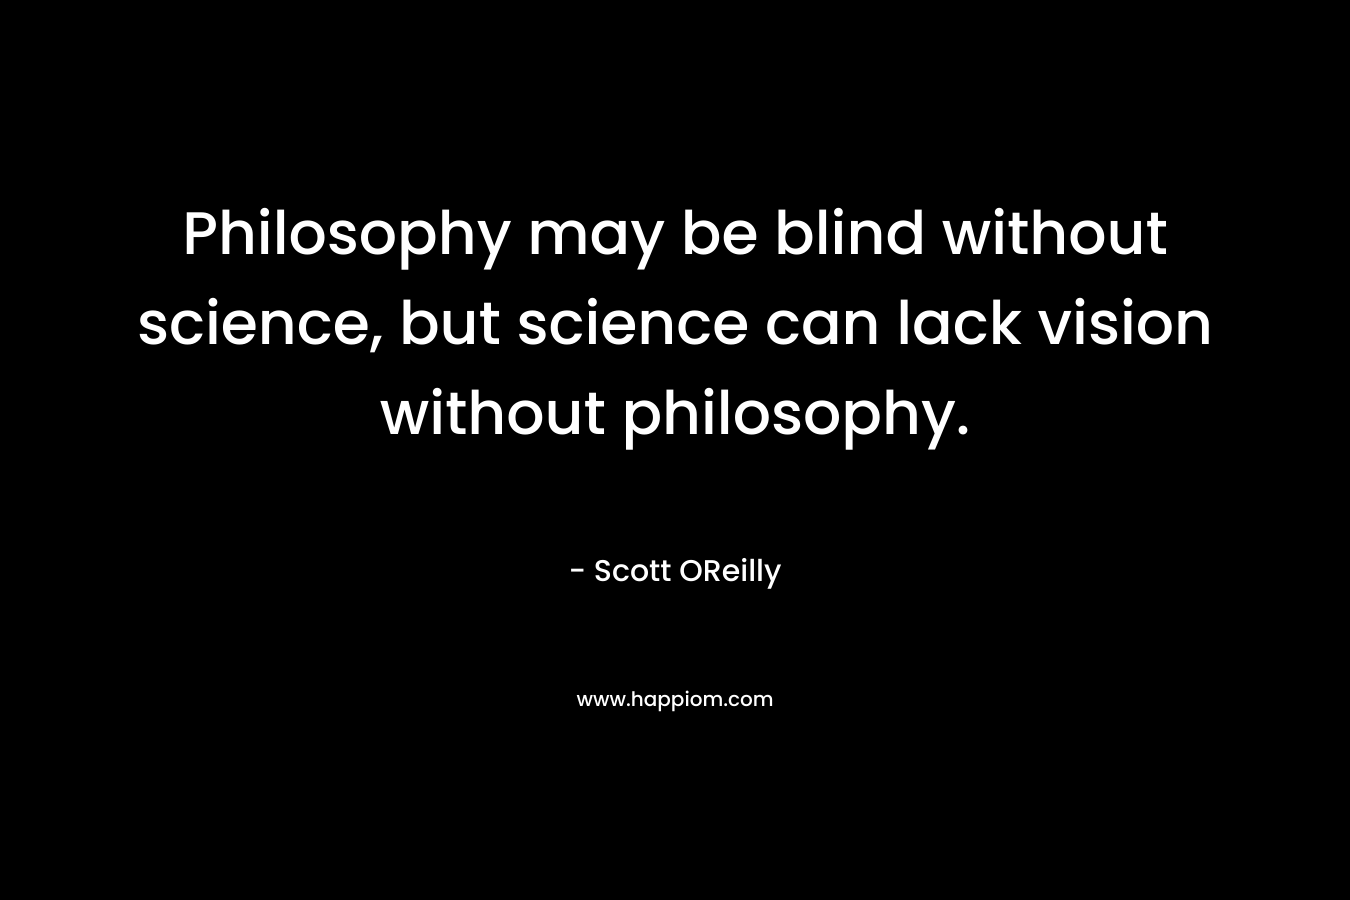 Philosophy may be blind without science, but science can lack vision without philosophy.